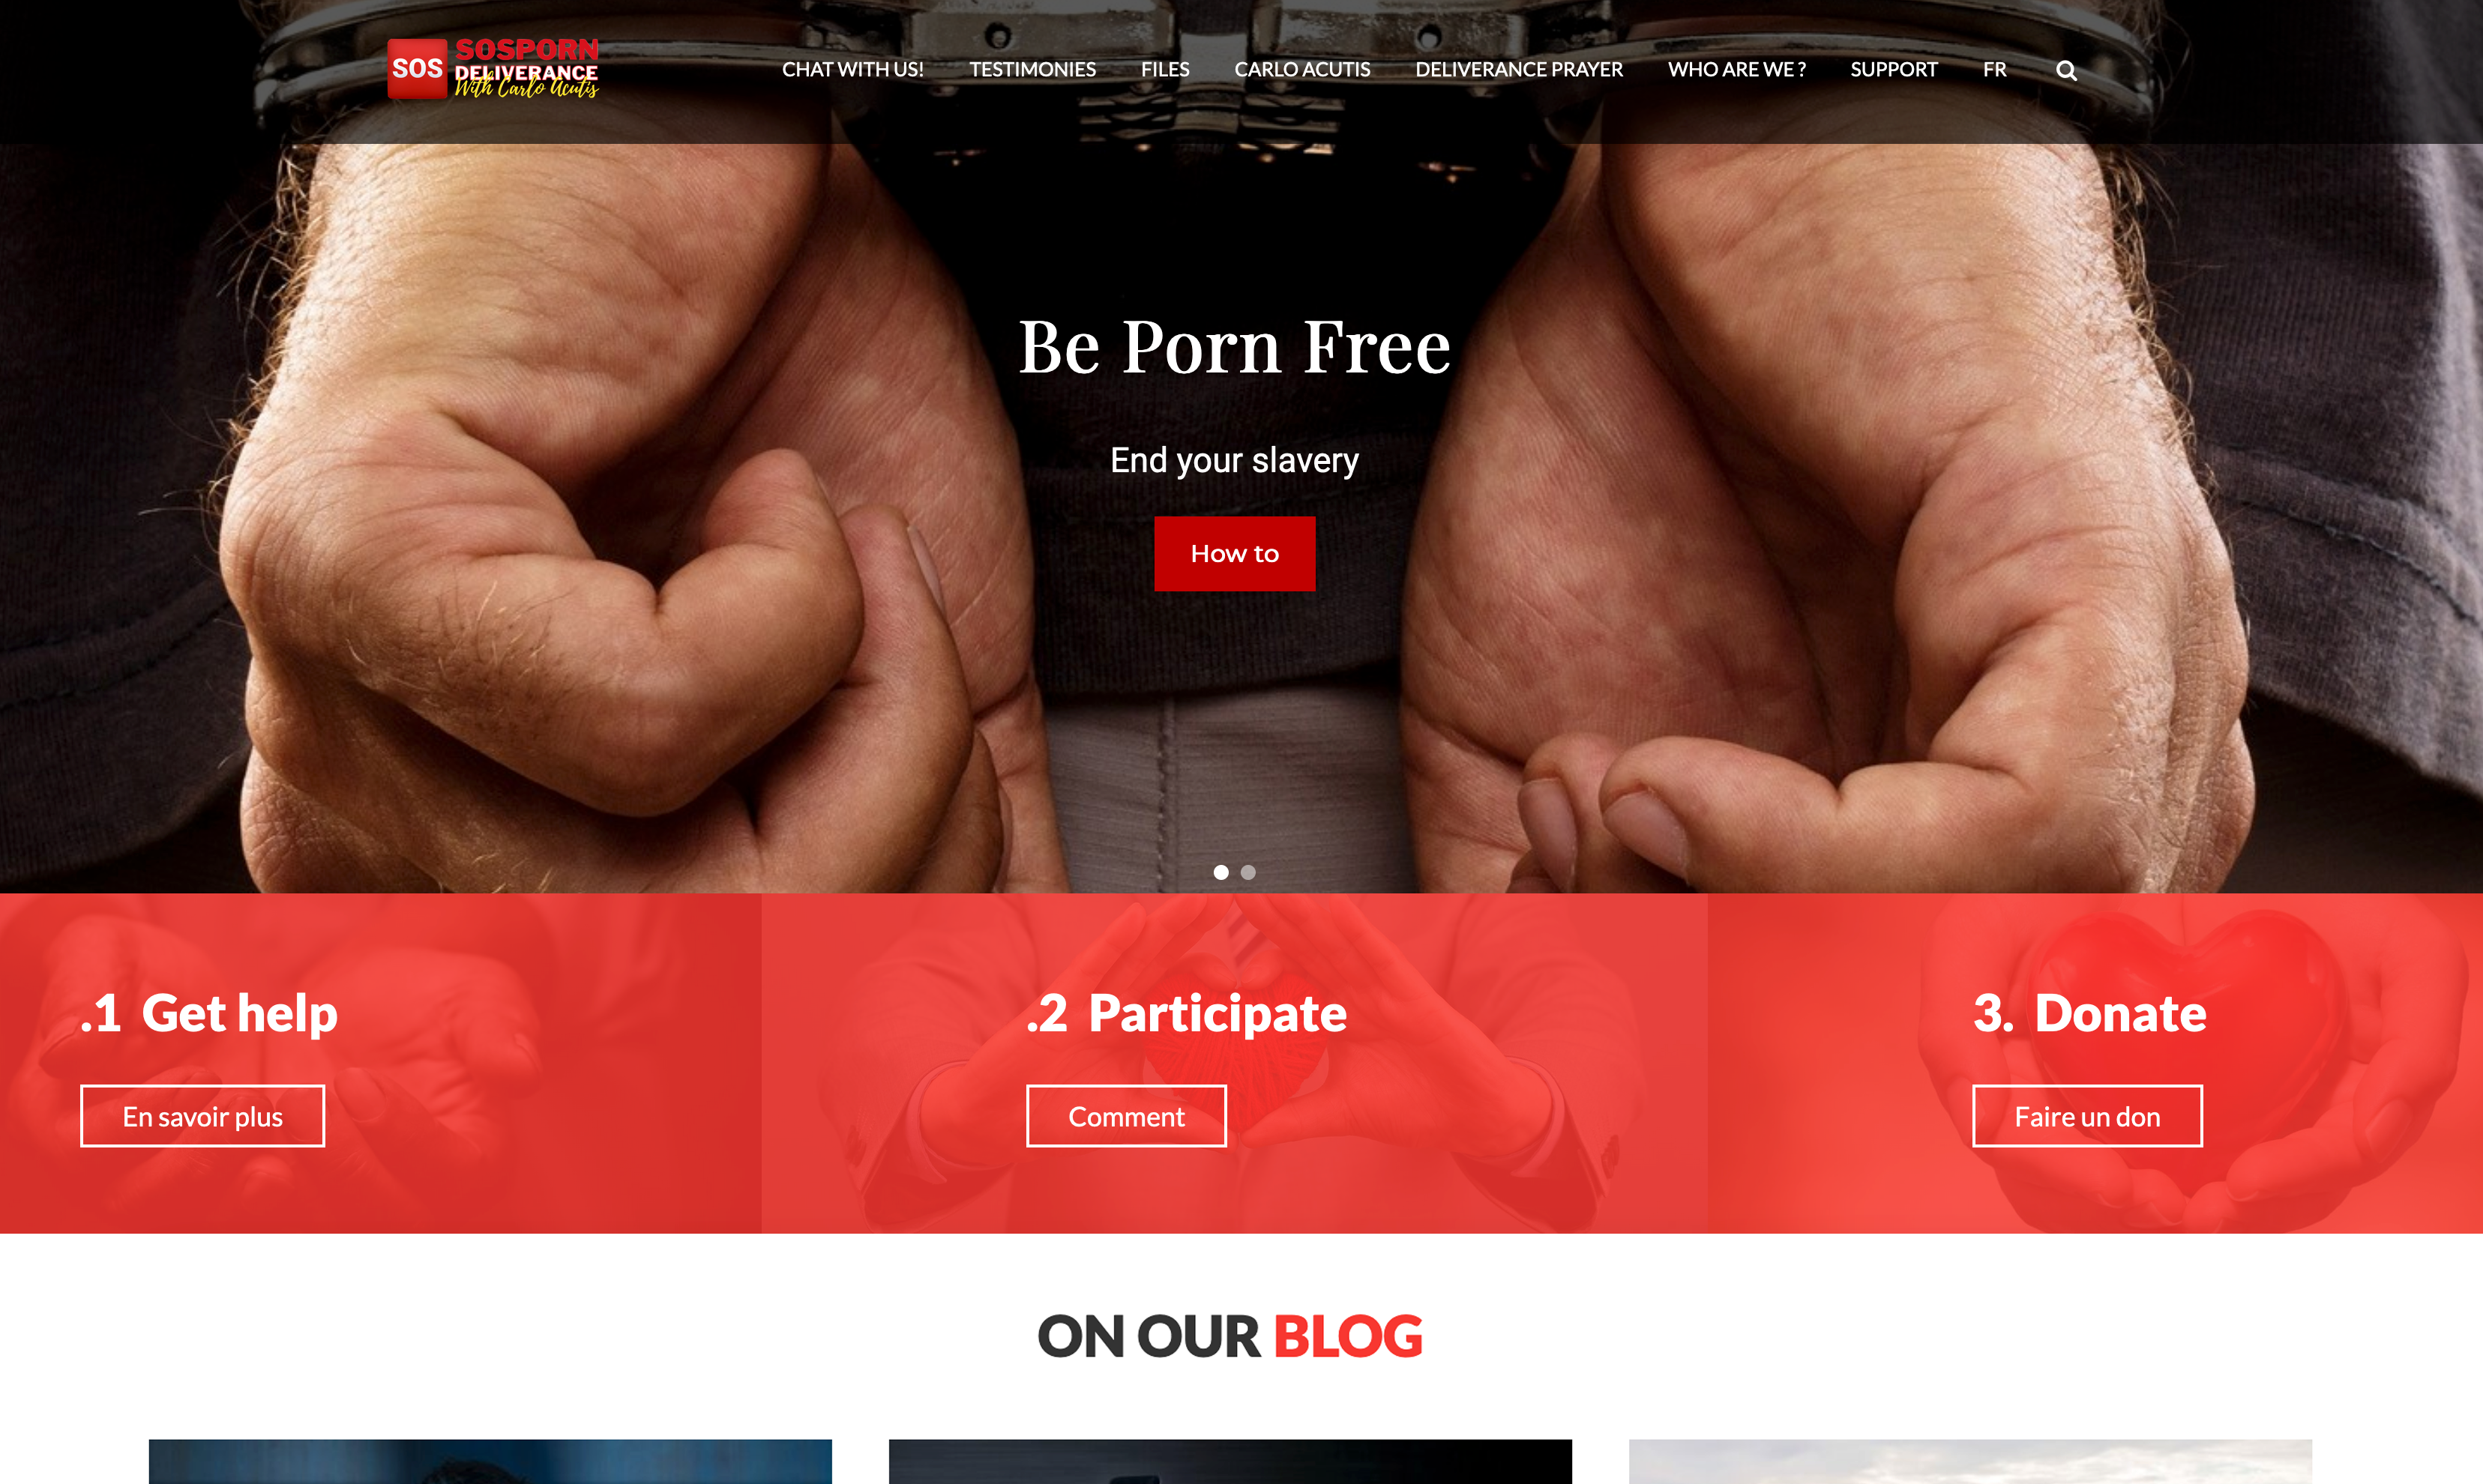 Our New Platform SOSporn.org: Helping Those Addicted to Pornography -  Lights in the Dark